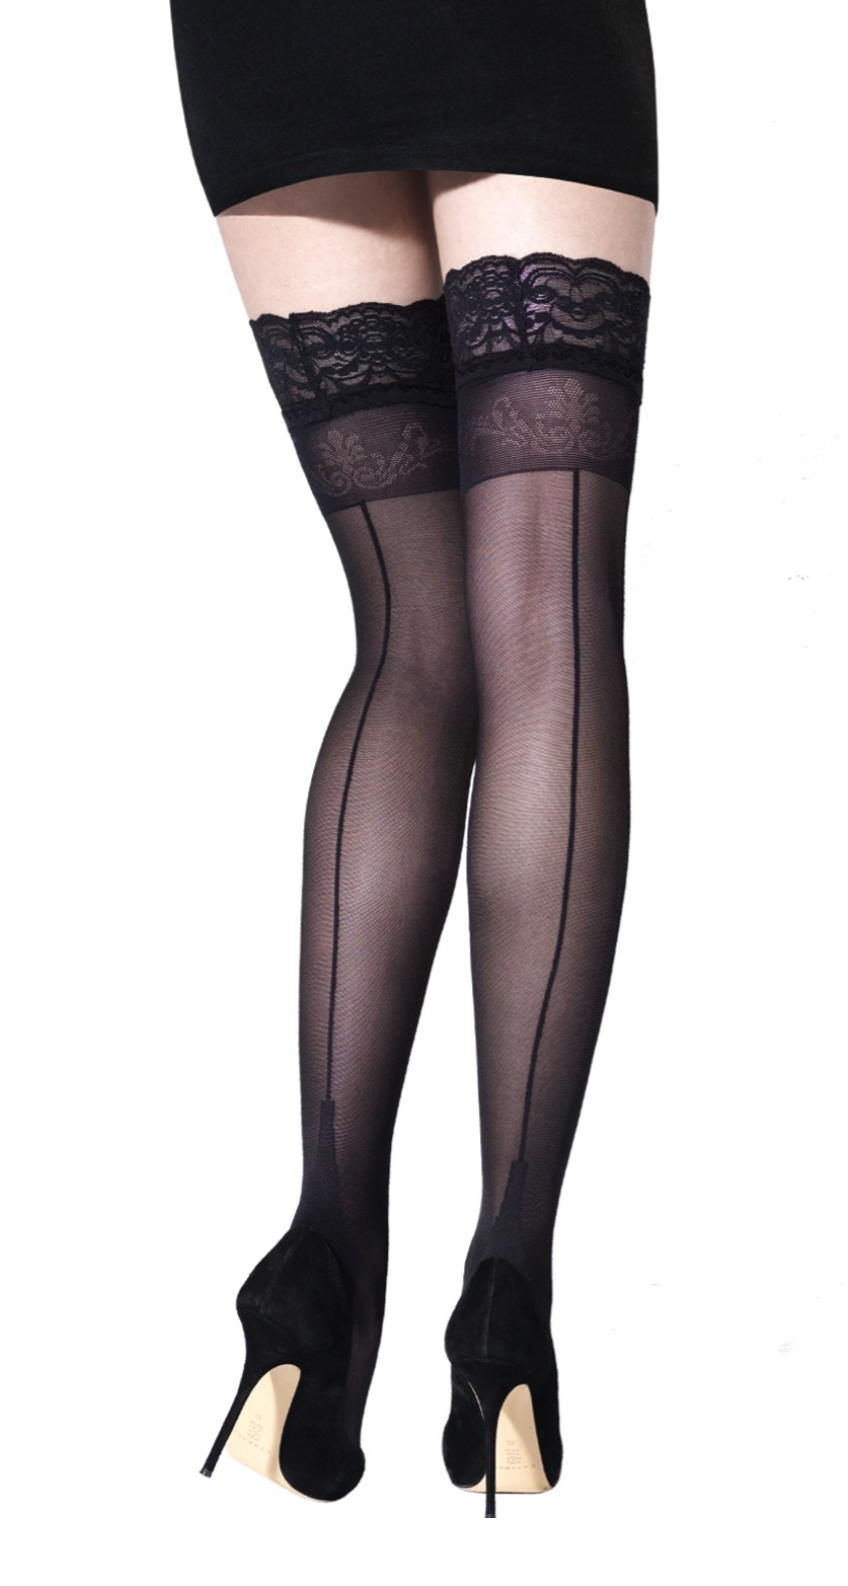 Emilio Cavallini Classic Back Seam Stay Ups - Semi sheer black hold-ups with back seam stripe, deep luxury lace top with silicone strips and reinforced toe.